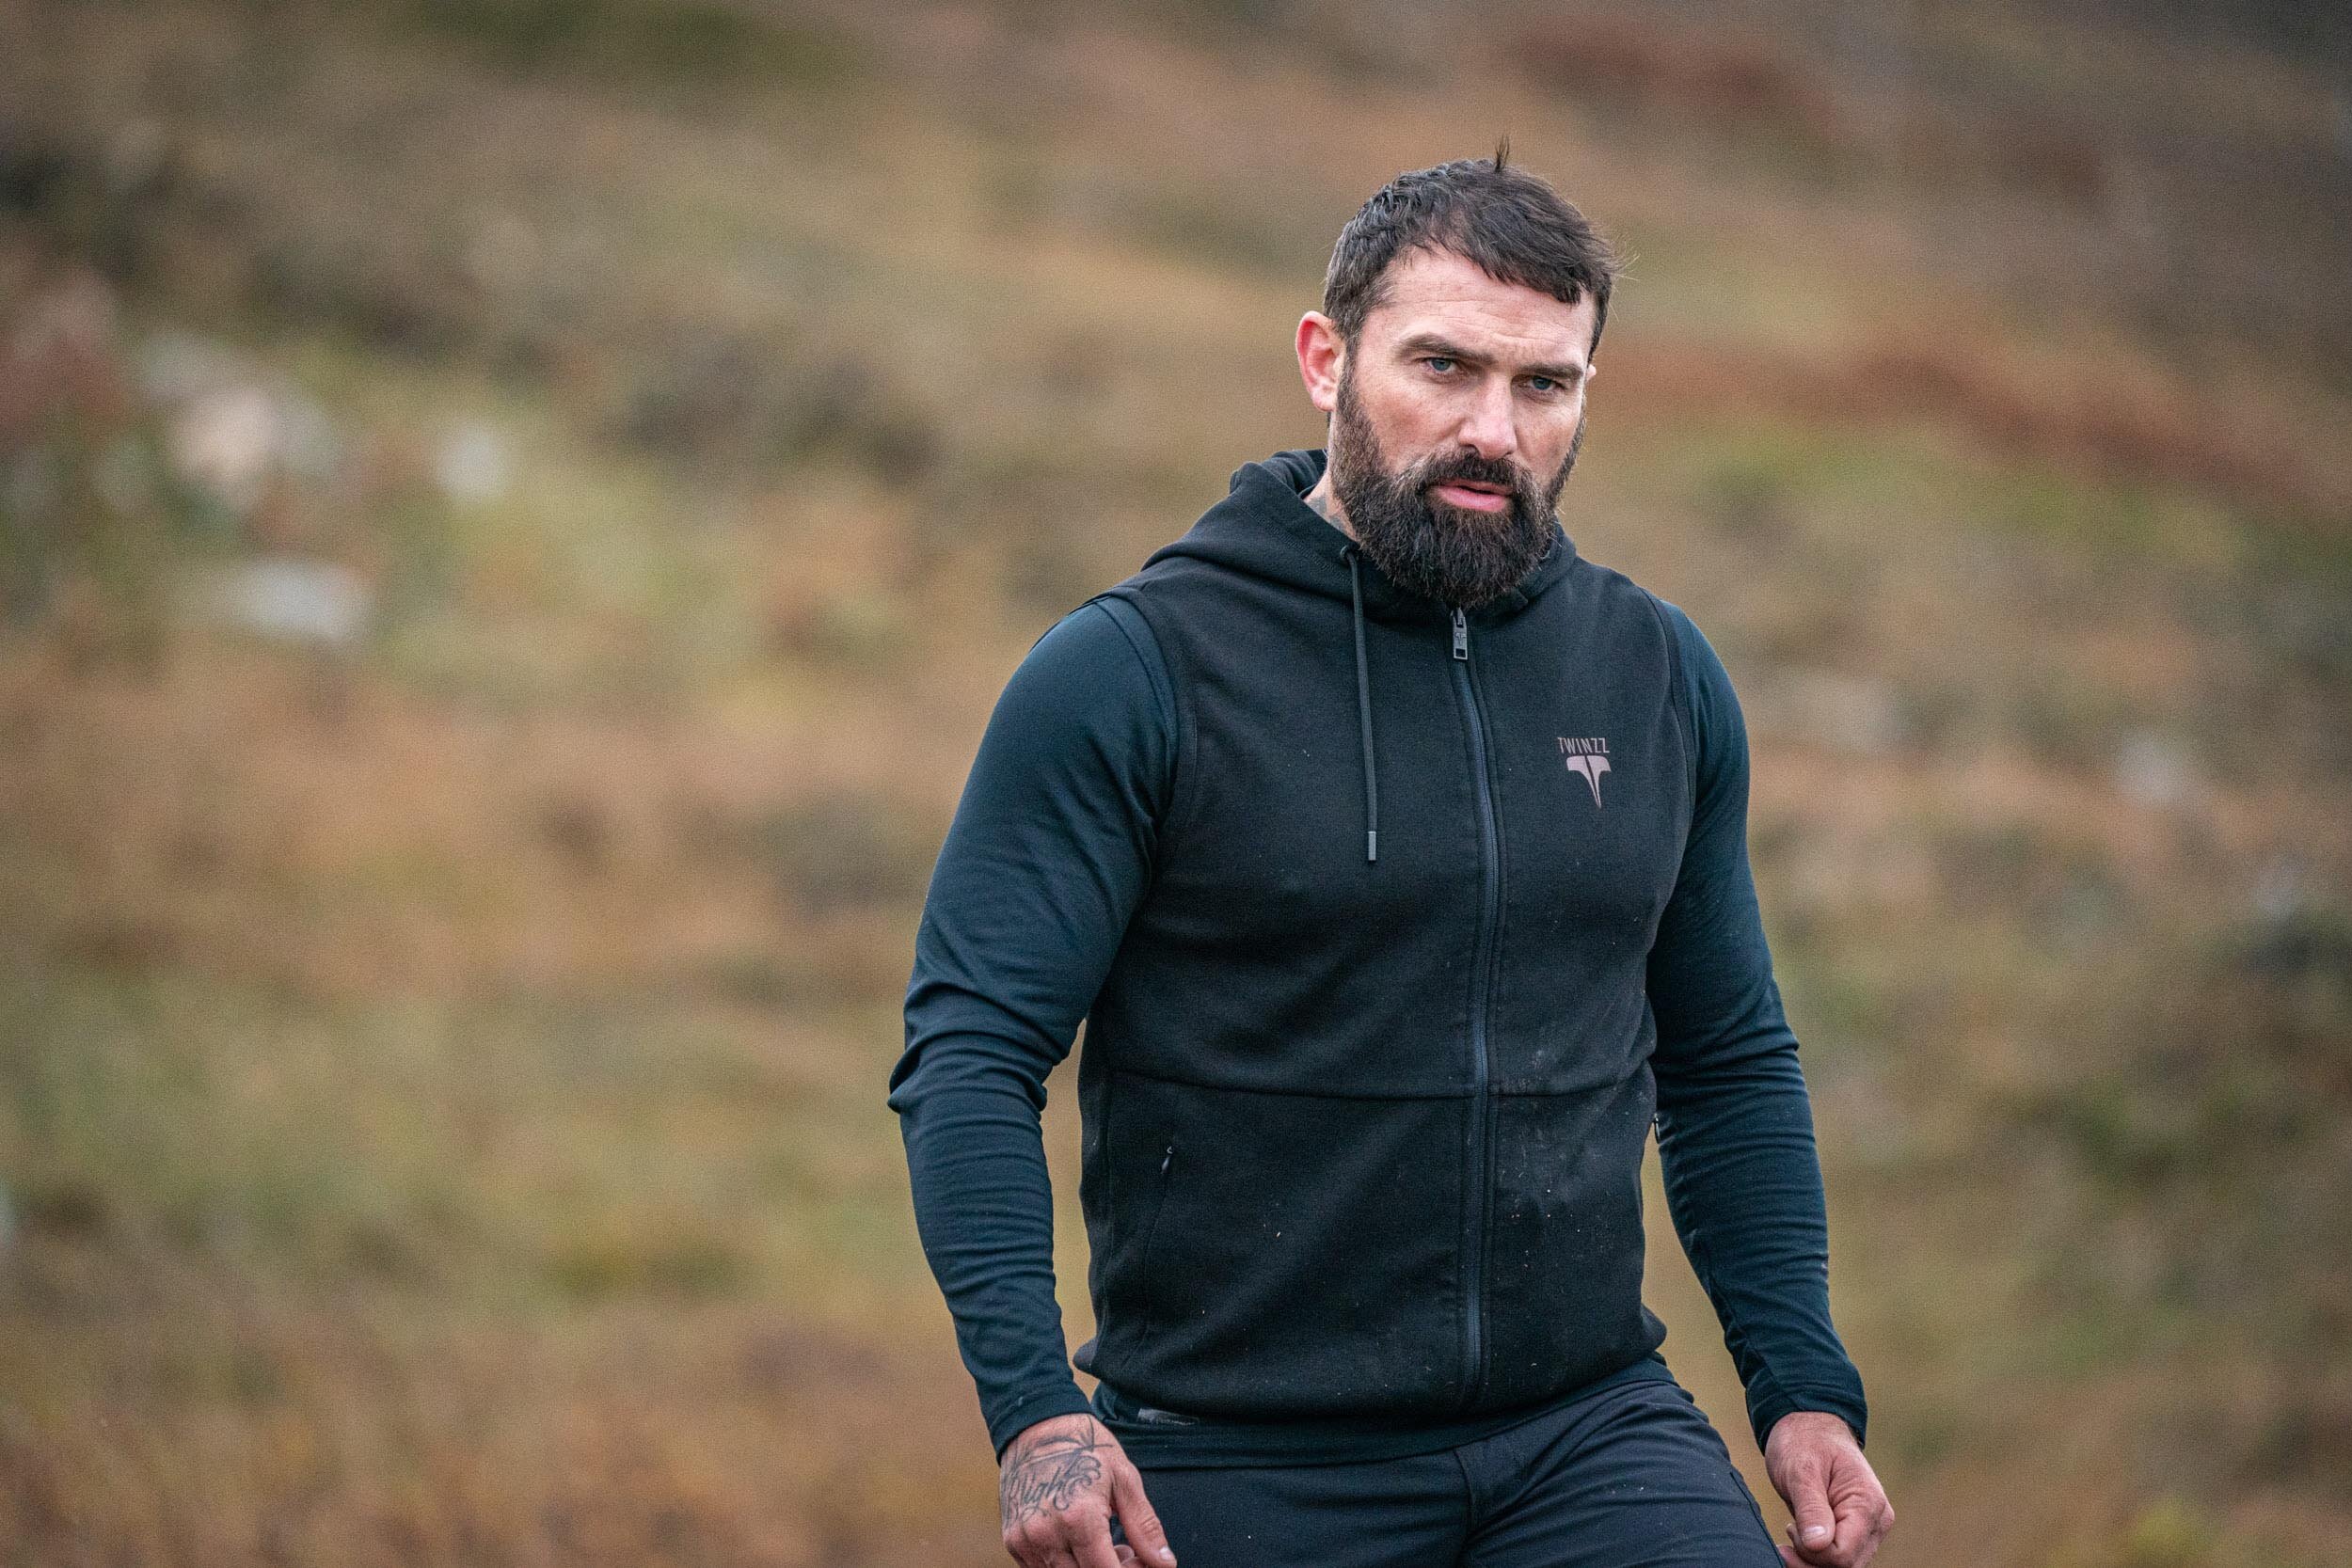  Chief Instructor Ant Middleton  Episode 2 - Murder Ball  Minnow Films / Channel 4 